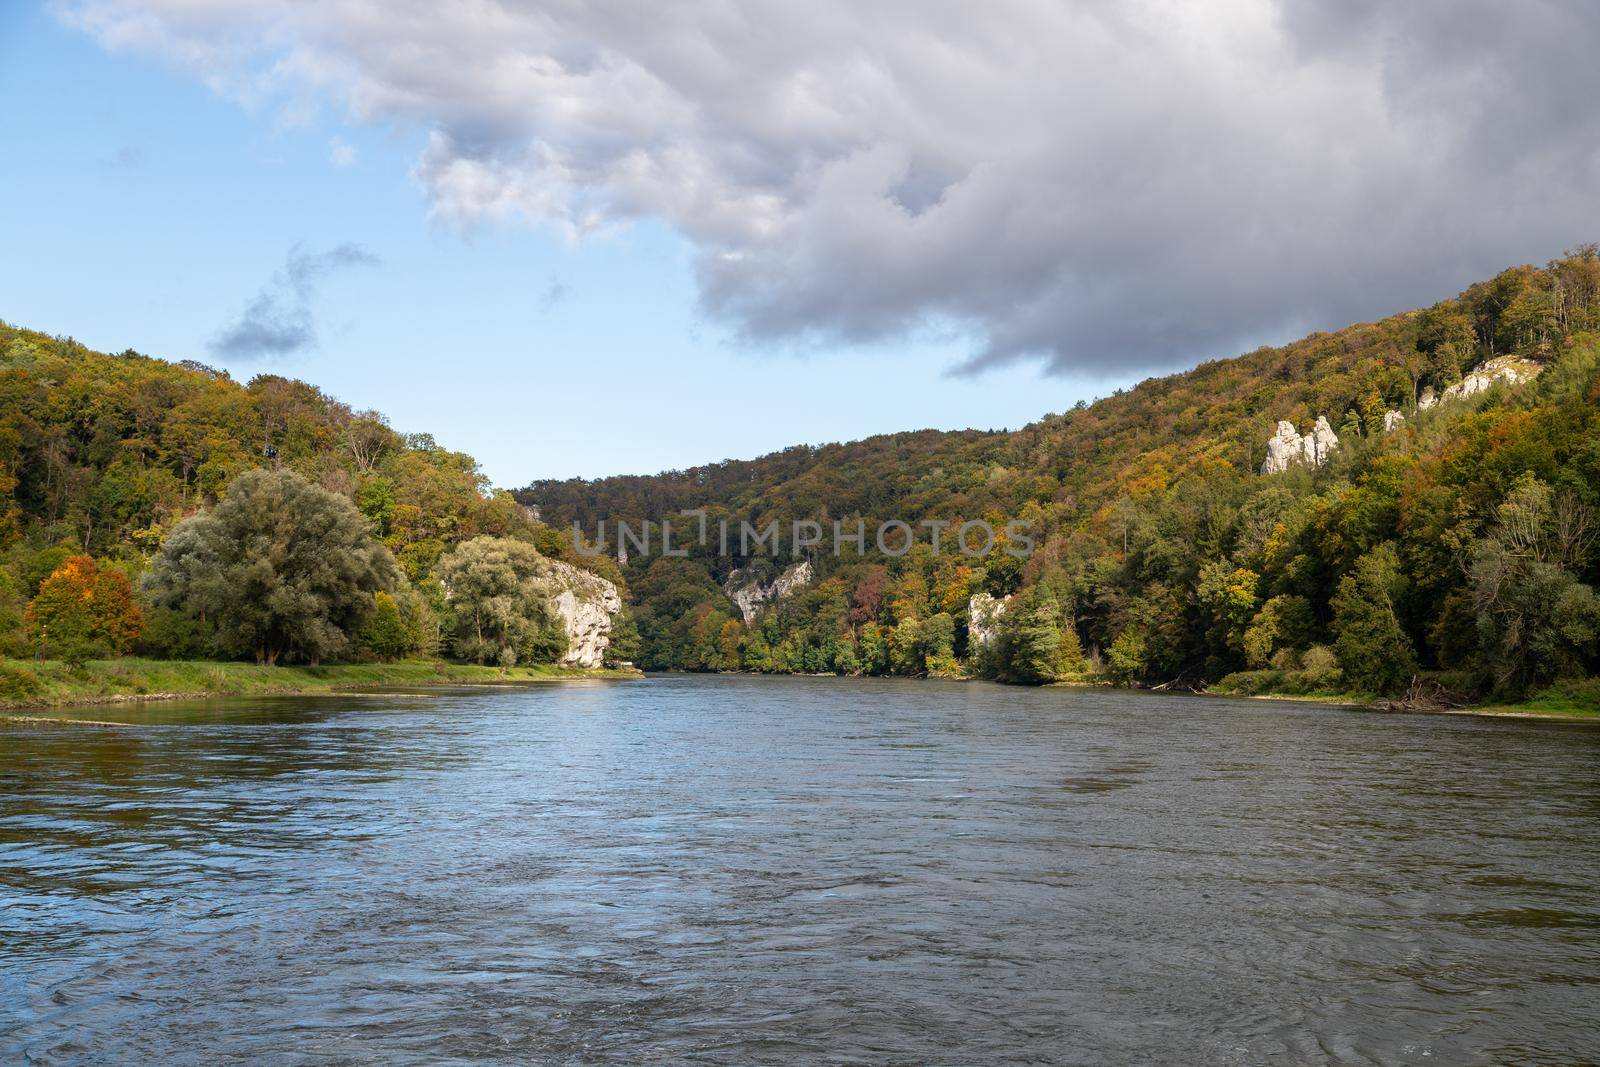 Nature reserve at Danube river breakthrough near Kelheim, Bavaria, Germany in autumn with limestone rock formations and plants with colorful leaves, autumnal impressions